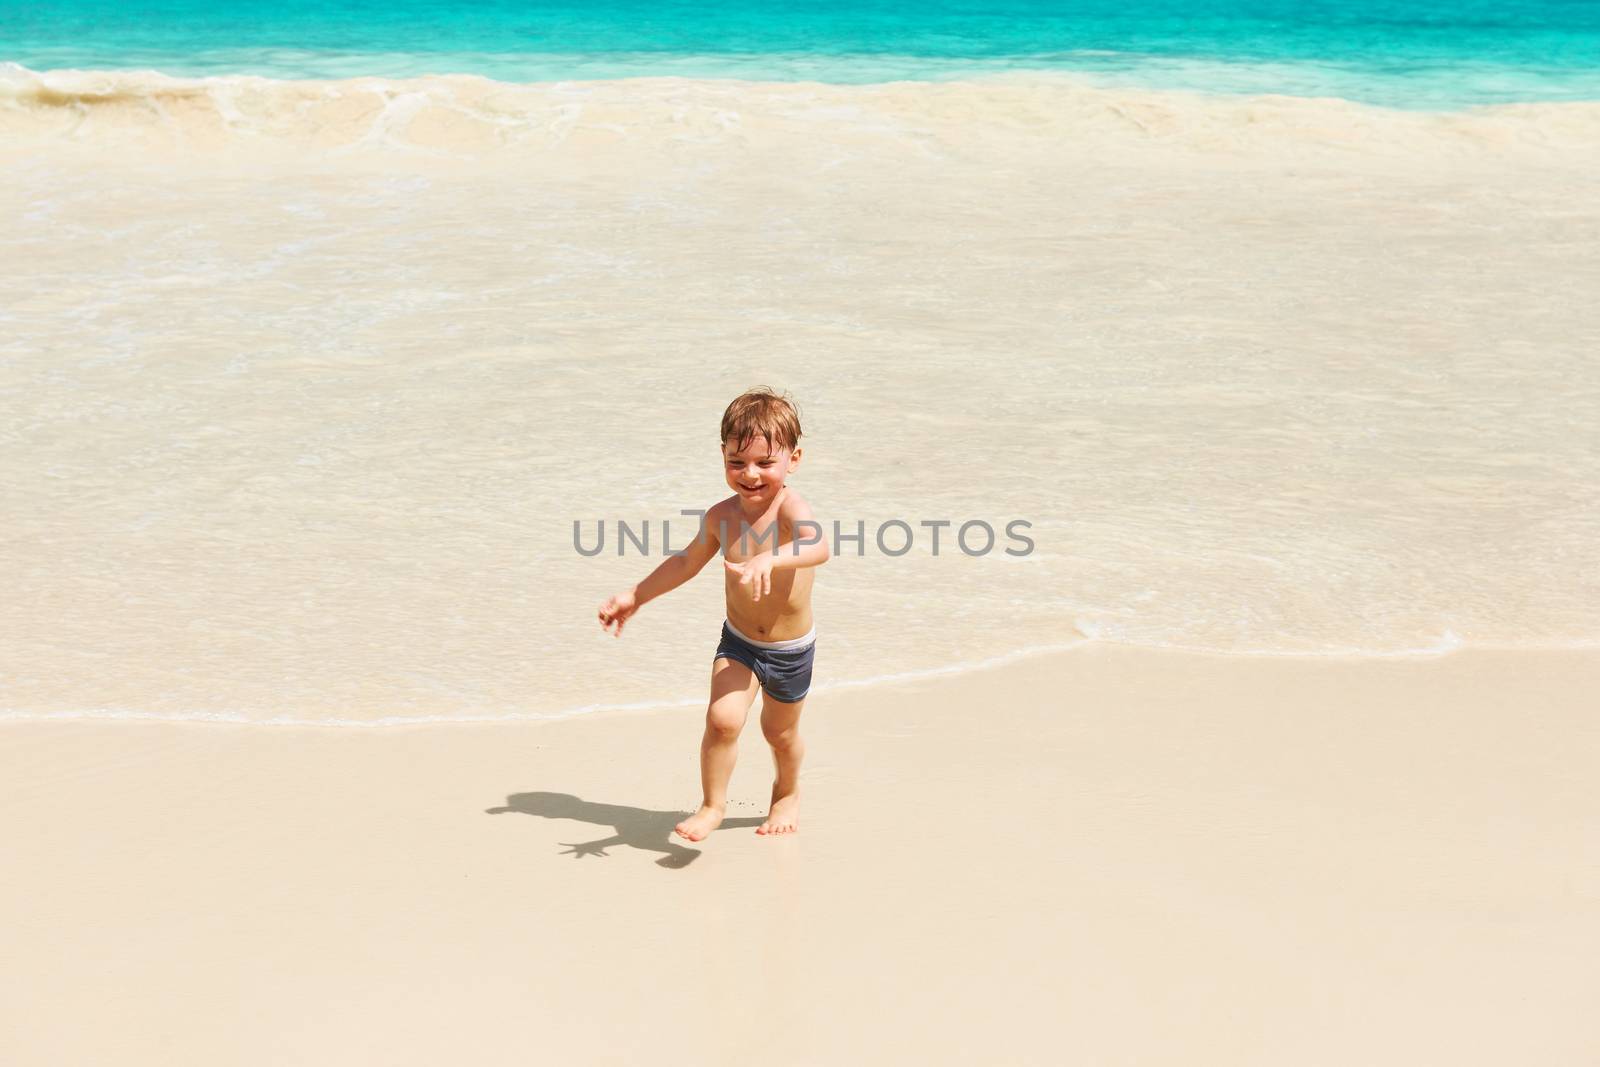 Two year old boy playing on beach by haveseen